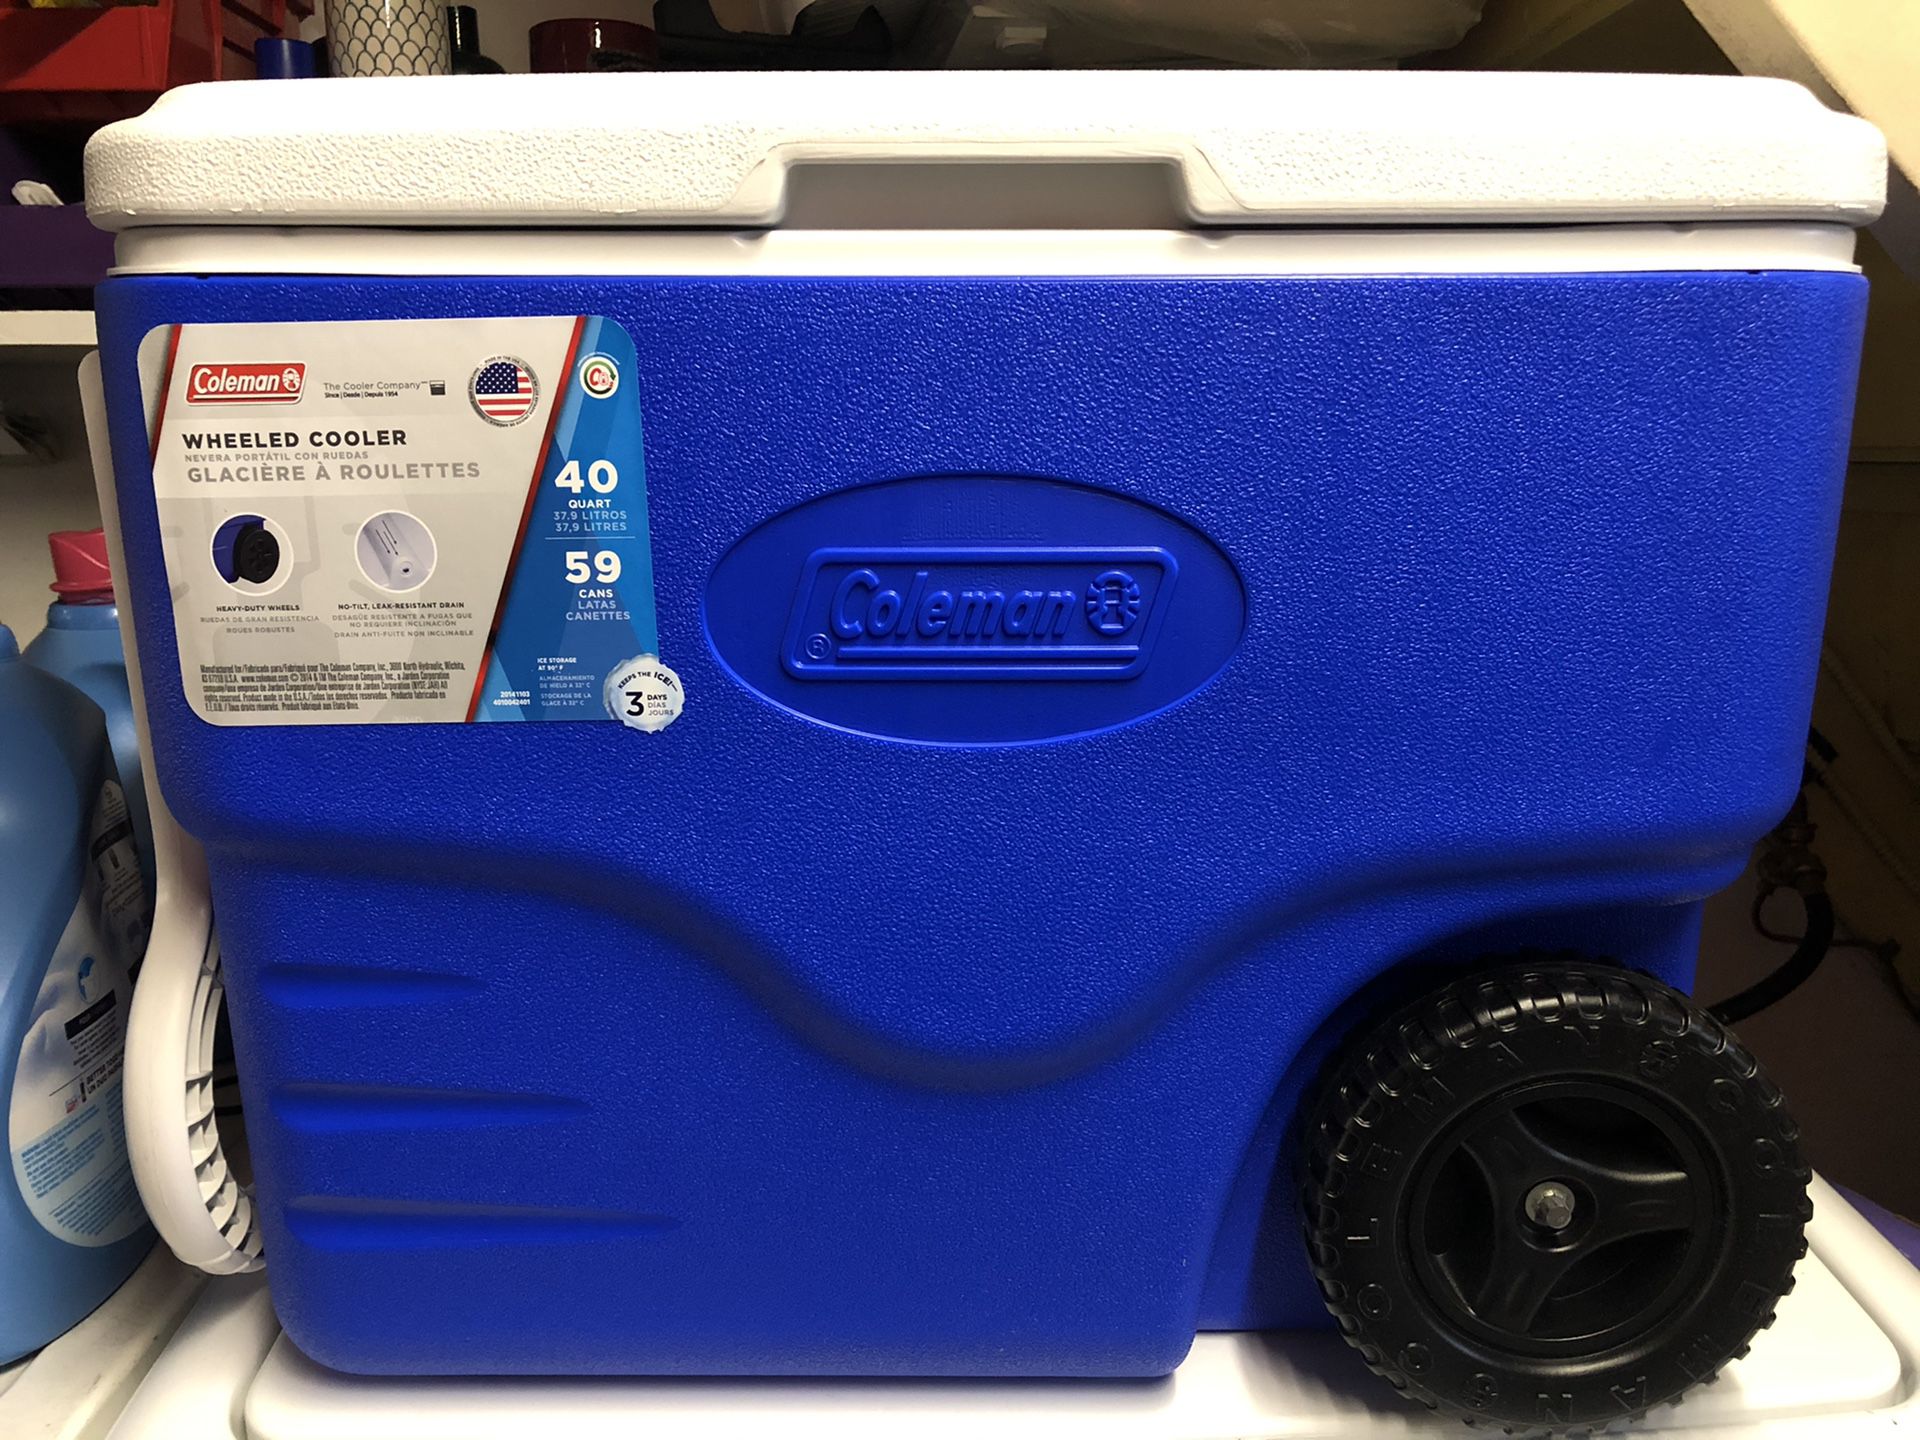 Coleman cooler with wheels